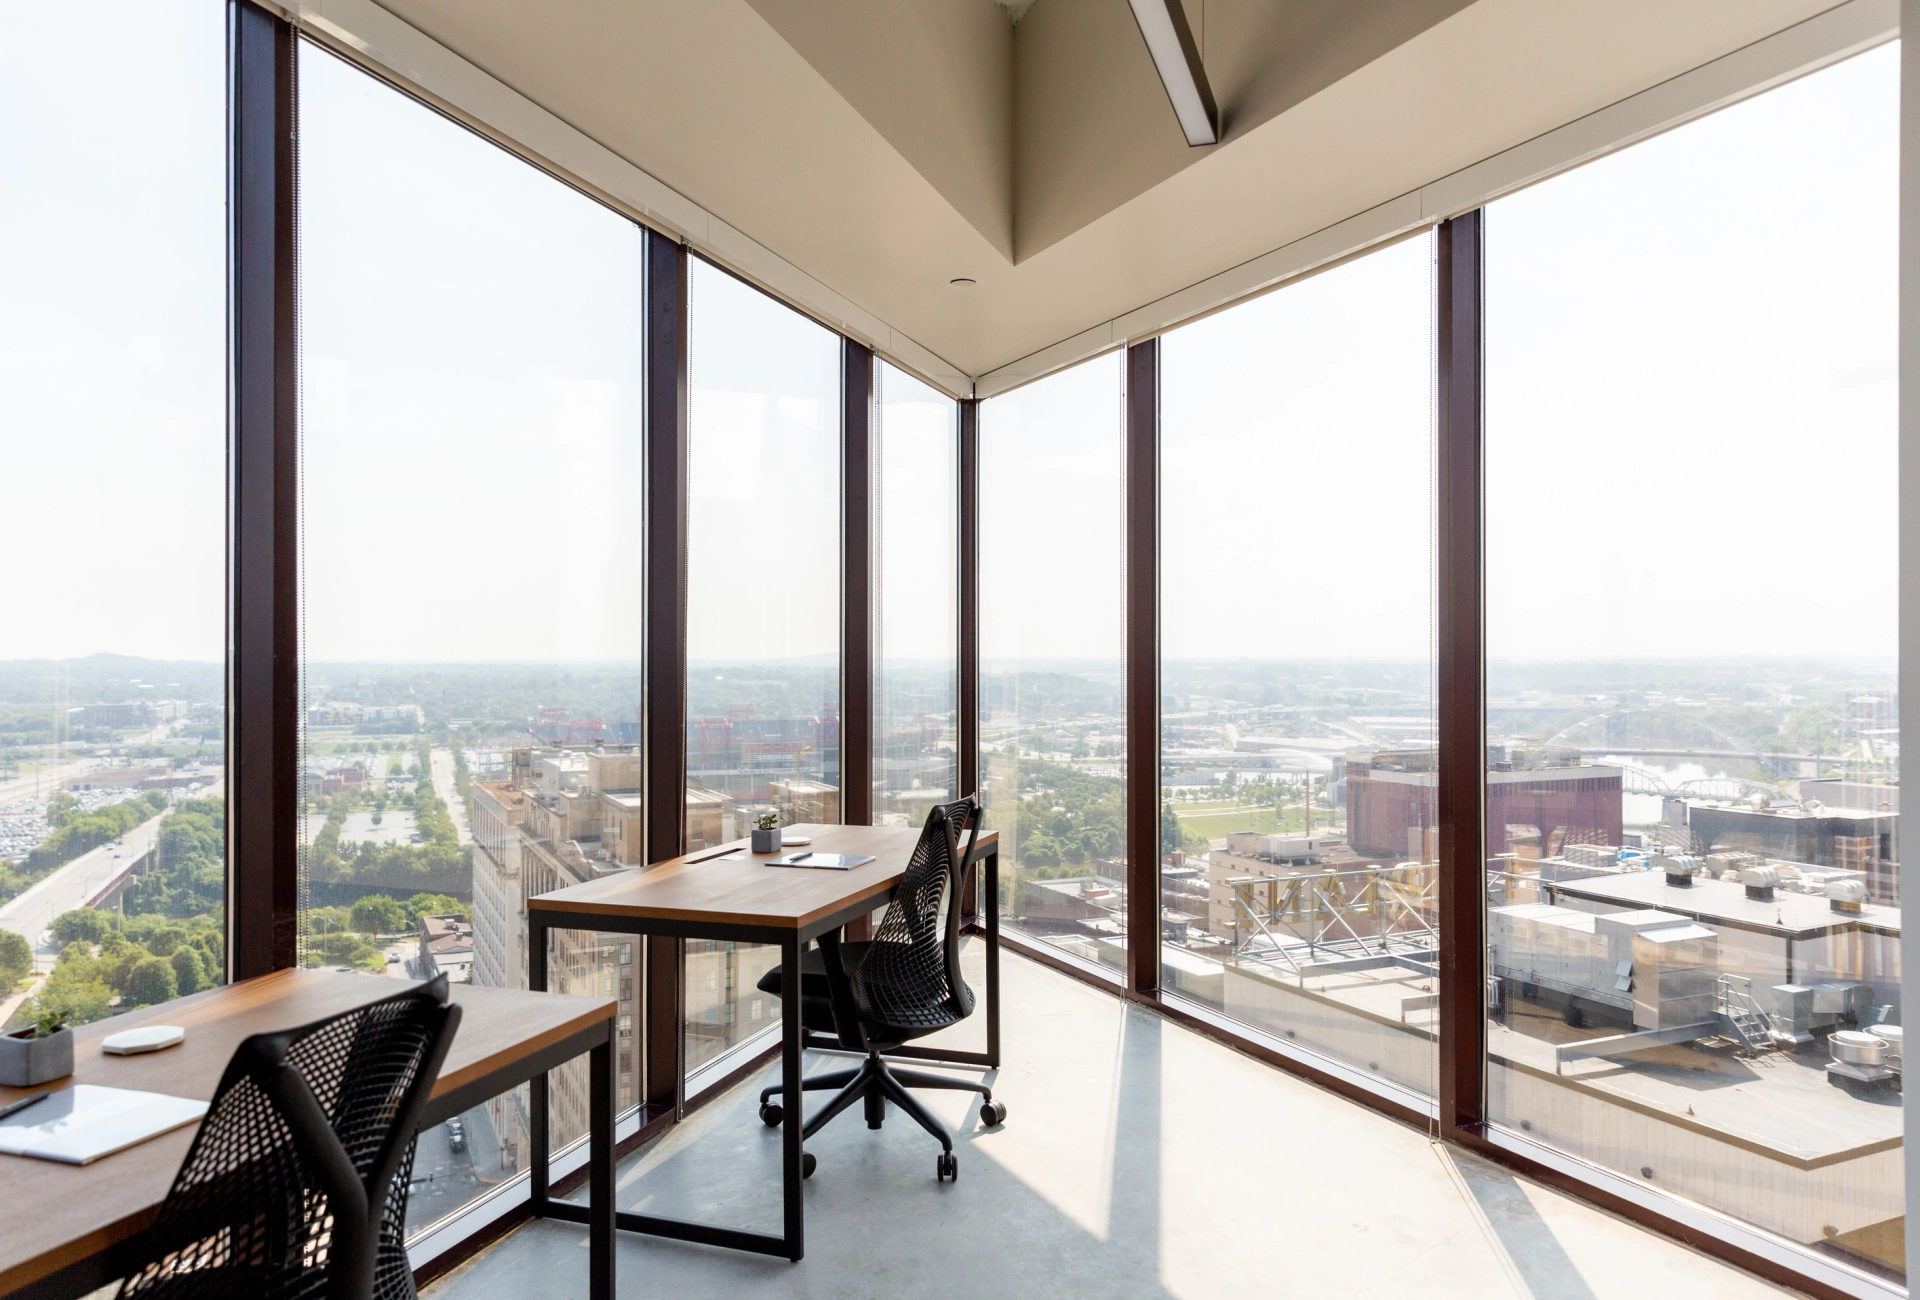 A coworking office with large windows overlooking a city.